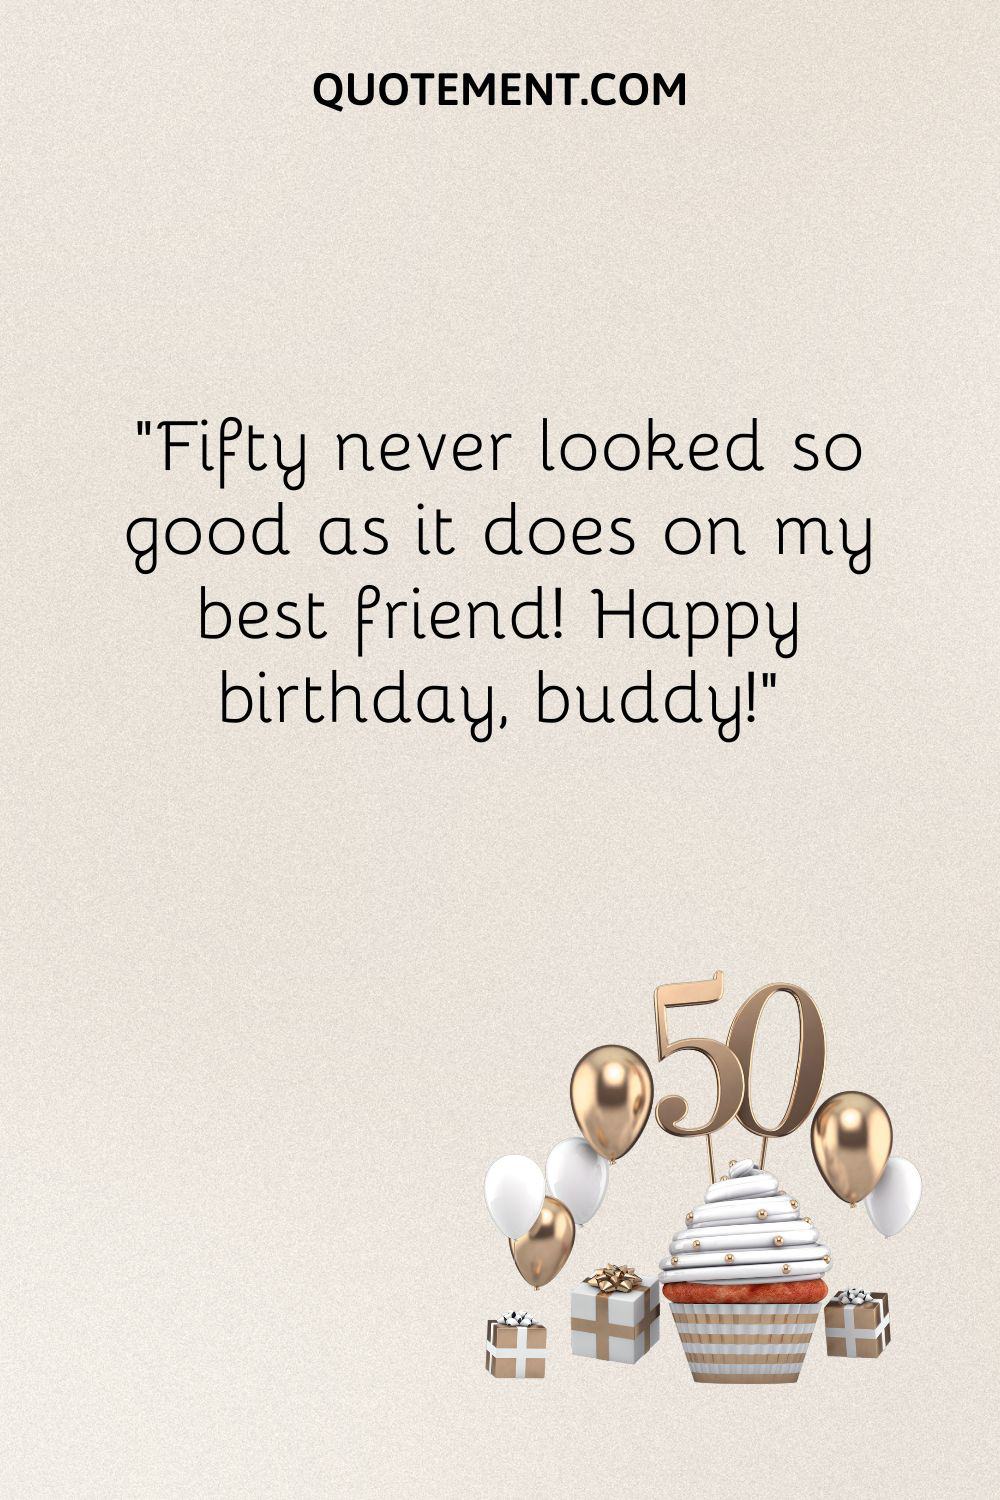 “Fifty never looked so good as it does on my best friend! Happy birthday, buddy!”